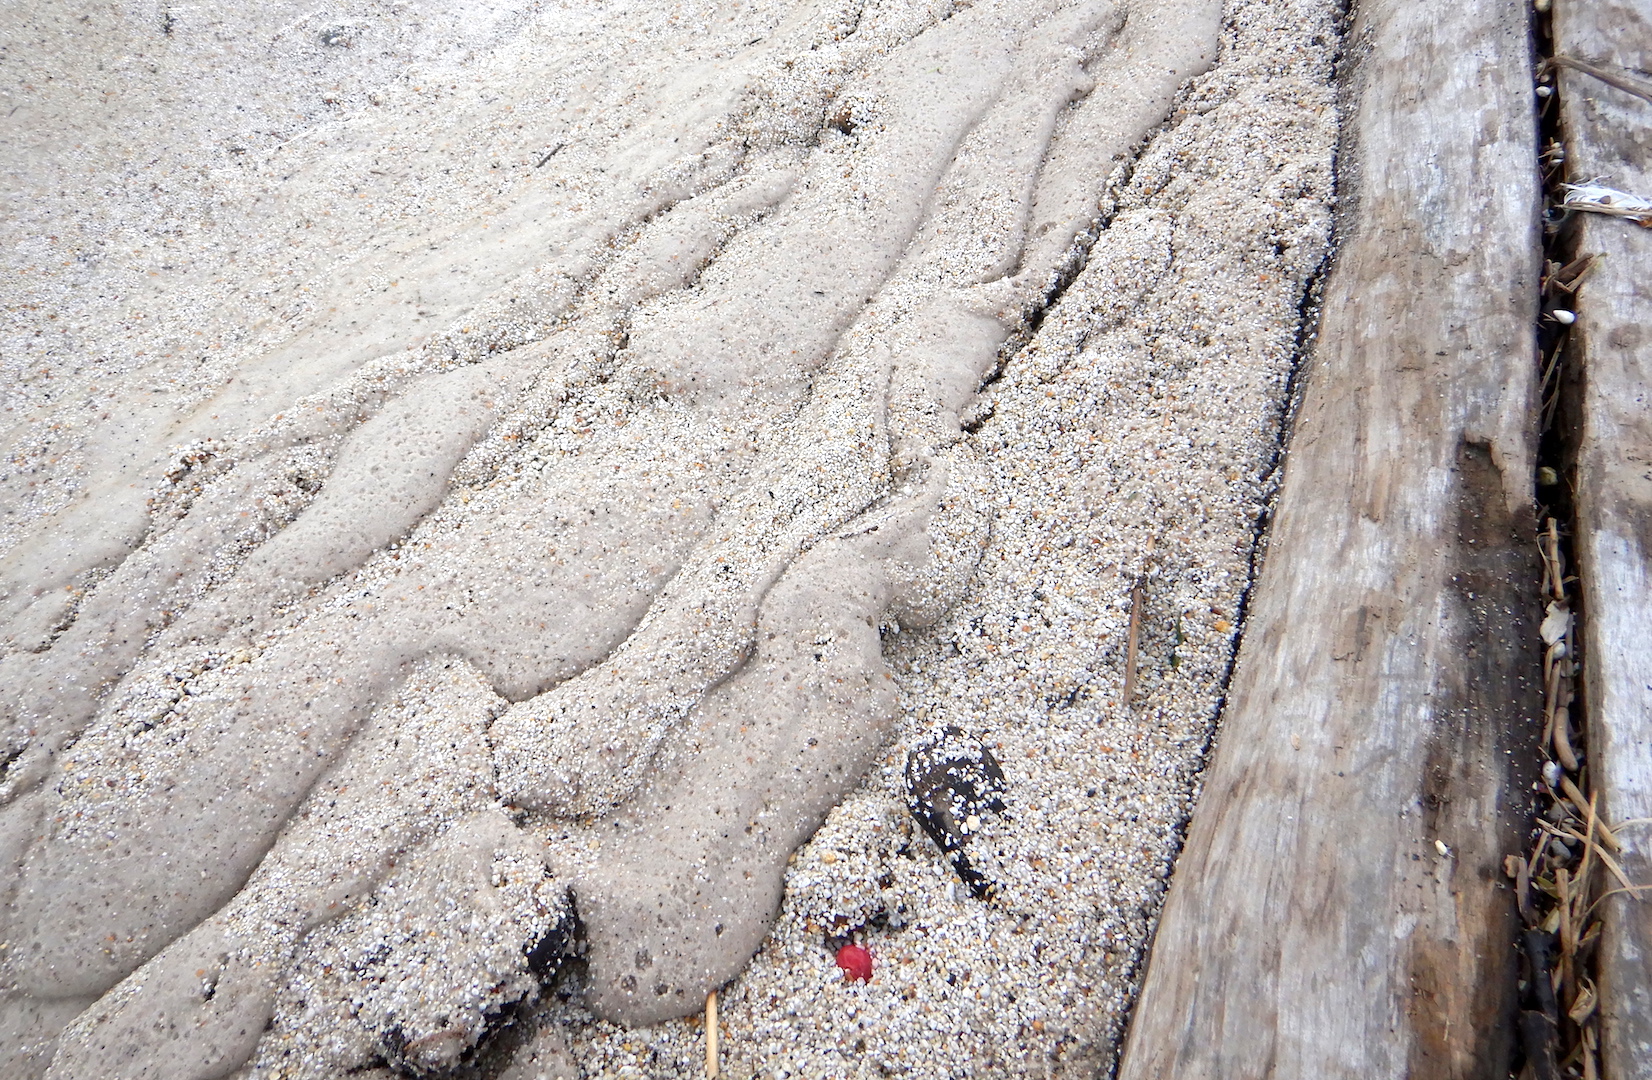 wet tan-colored sand next to log